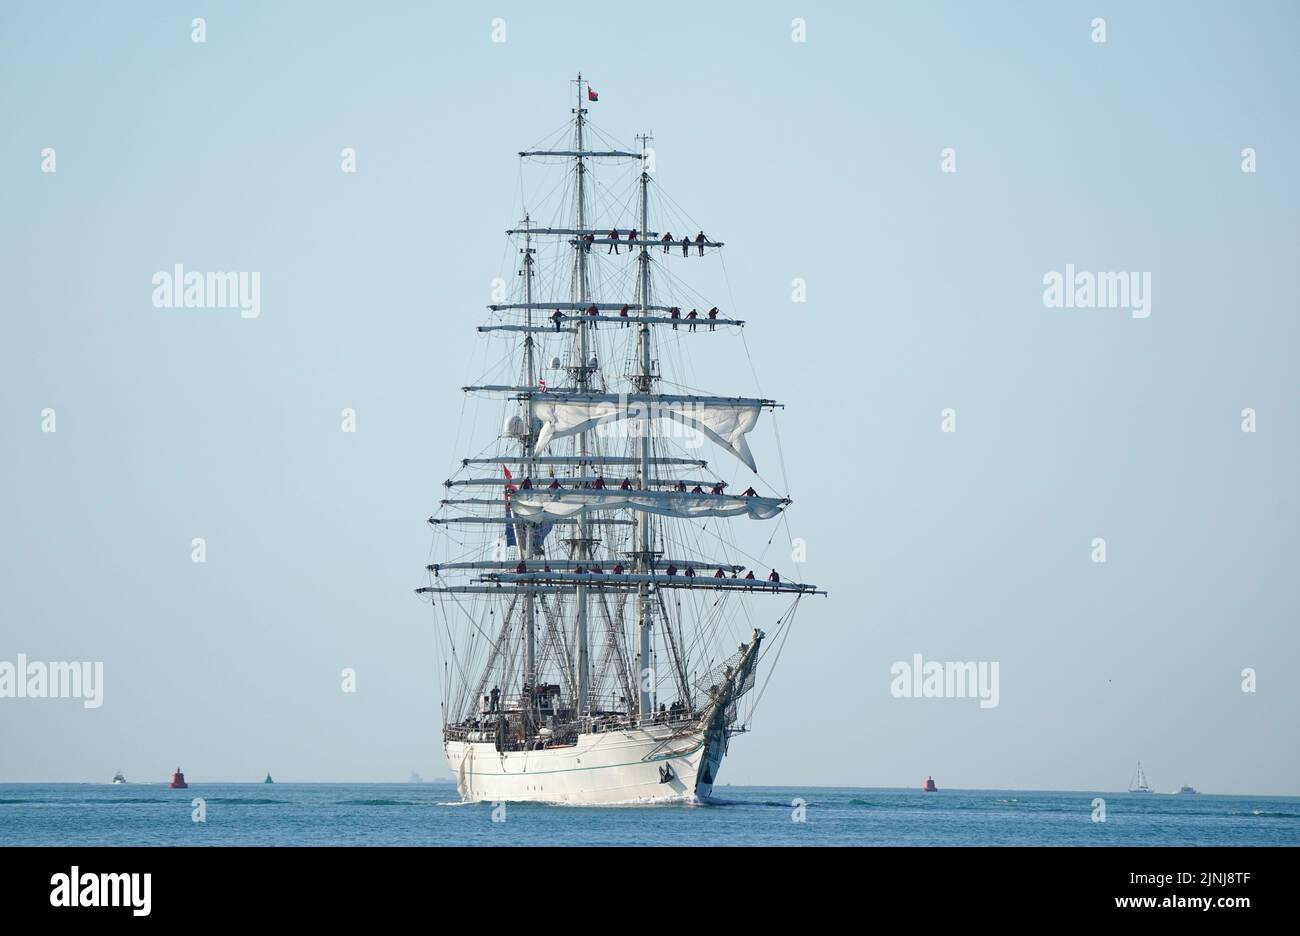 The vessel Shabab Oman II, a full-rigged training ship of the Royal Navy of Oman, arrives into Portsmouth Harbour. The ship is a blend of the traditional and modern with state of the art computerised communication systems and navigation equipment, but from the wooden decking upwards, the ship is traditional in terms of her sails and rigging. Picture date: Friday August 12, 2022. Stock Photo